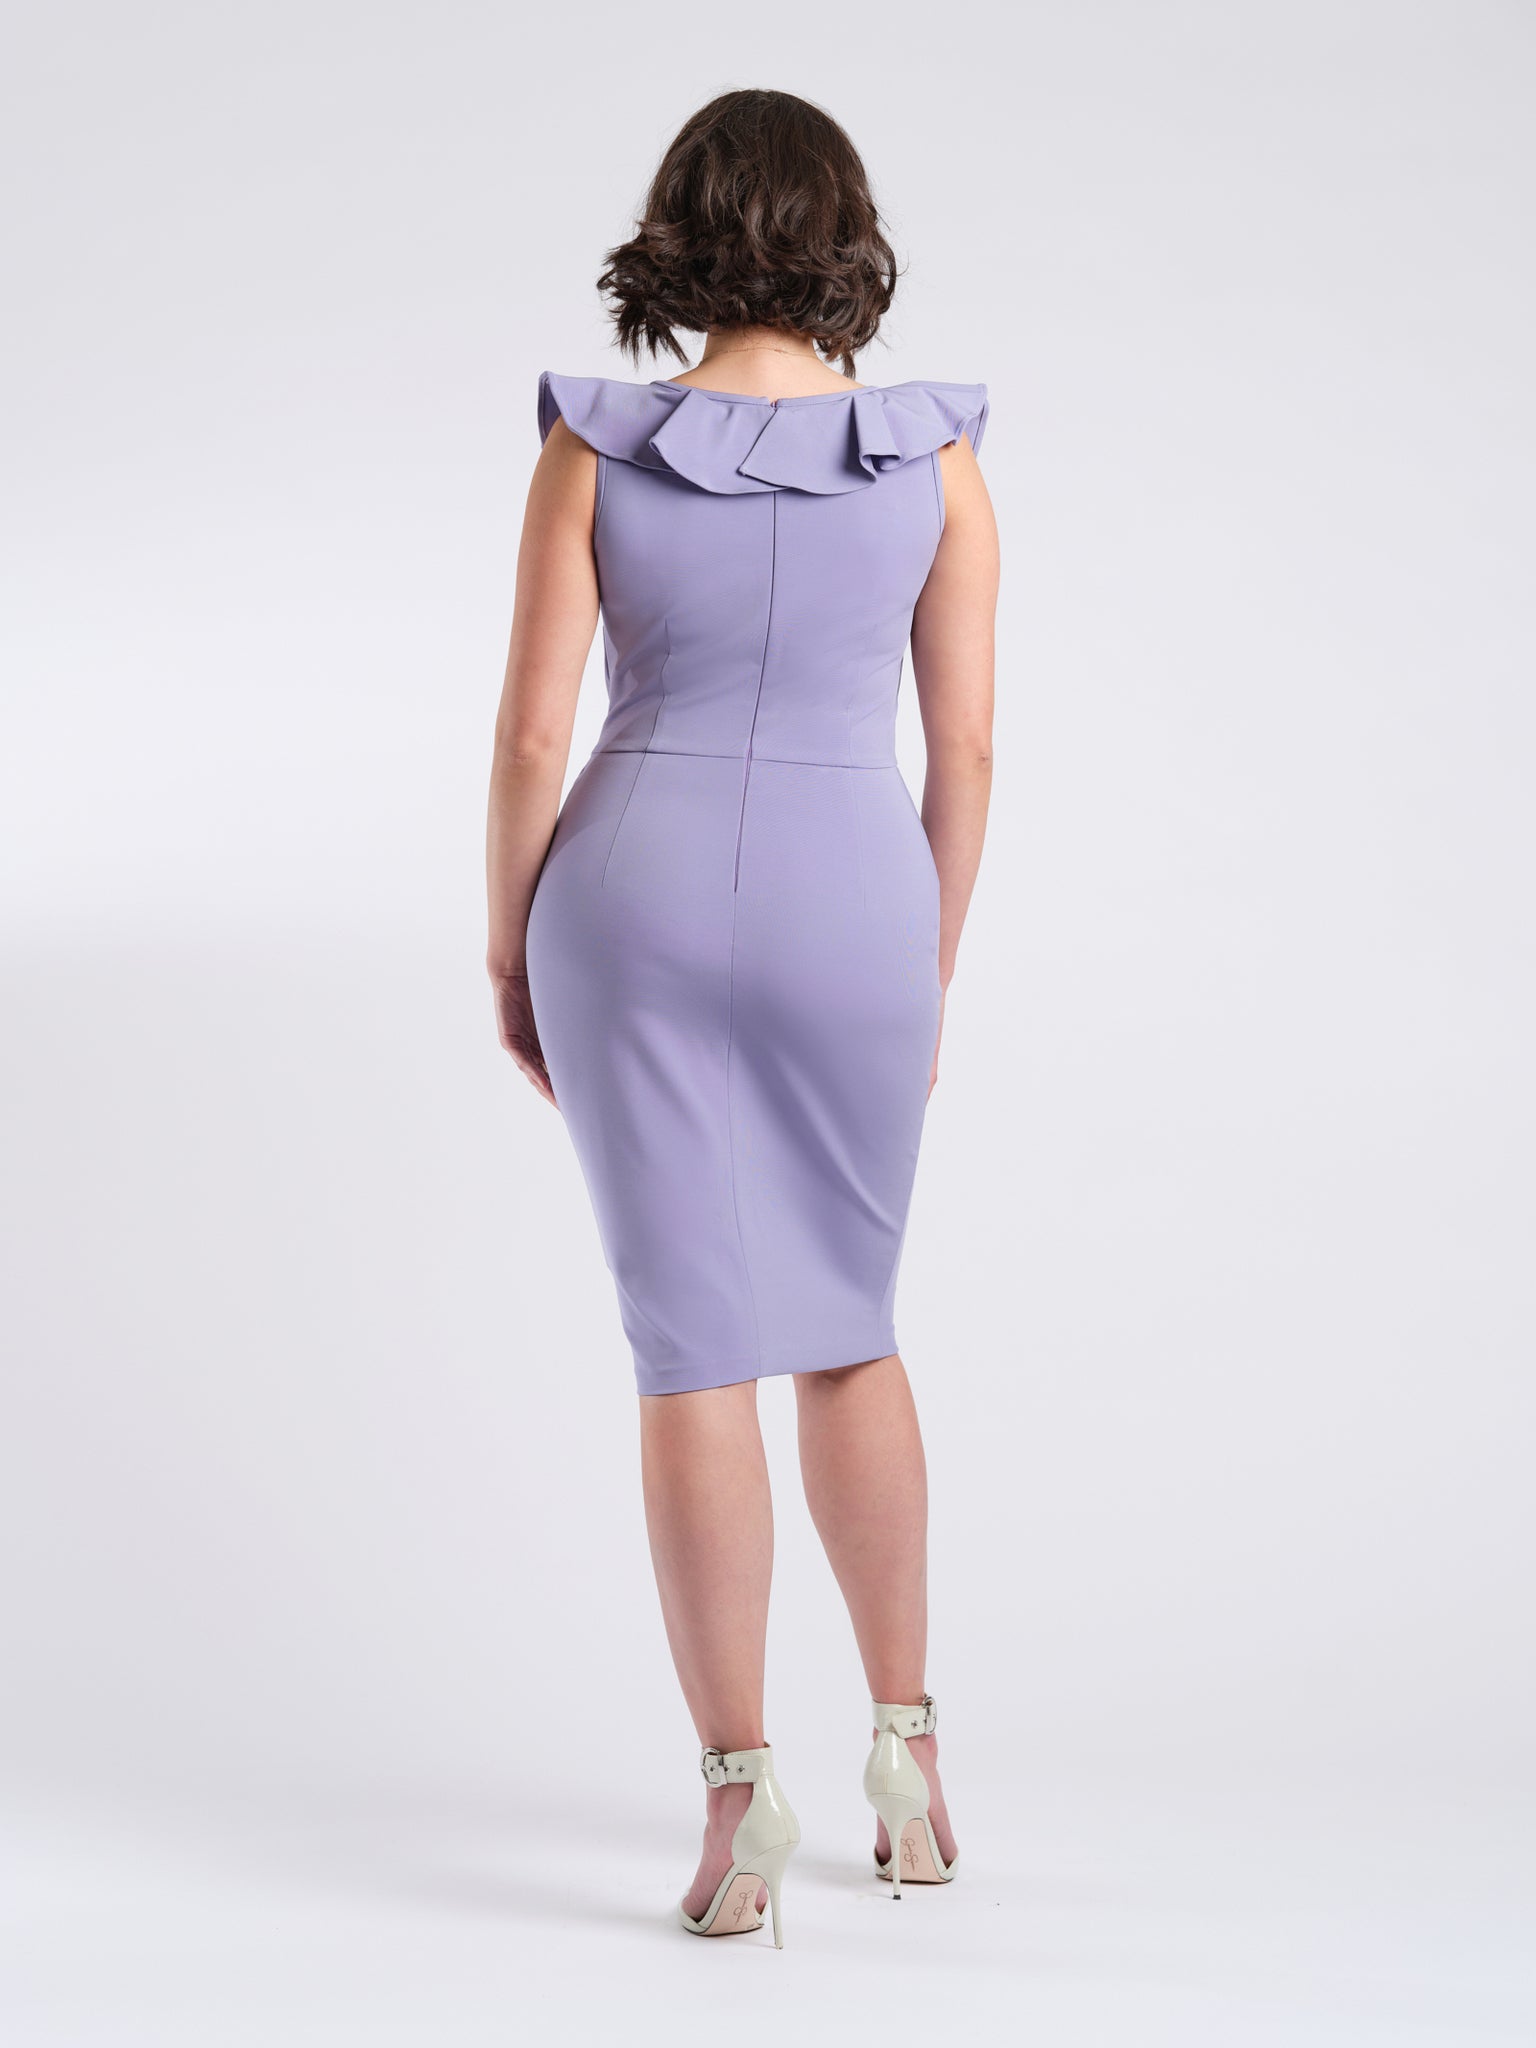 Back view of a woman wearing a stretch viscose fuller bust v-neck sheath dress with ruffles that frame the neckline in lilac designed by Miriam Baker.